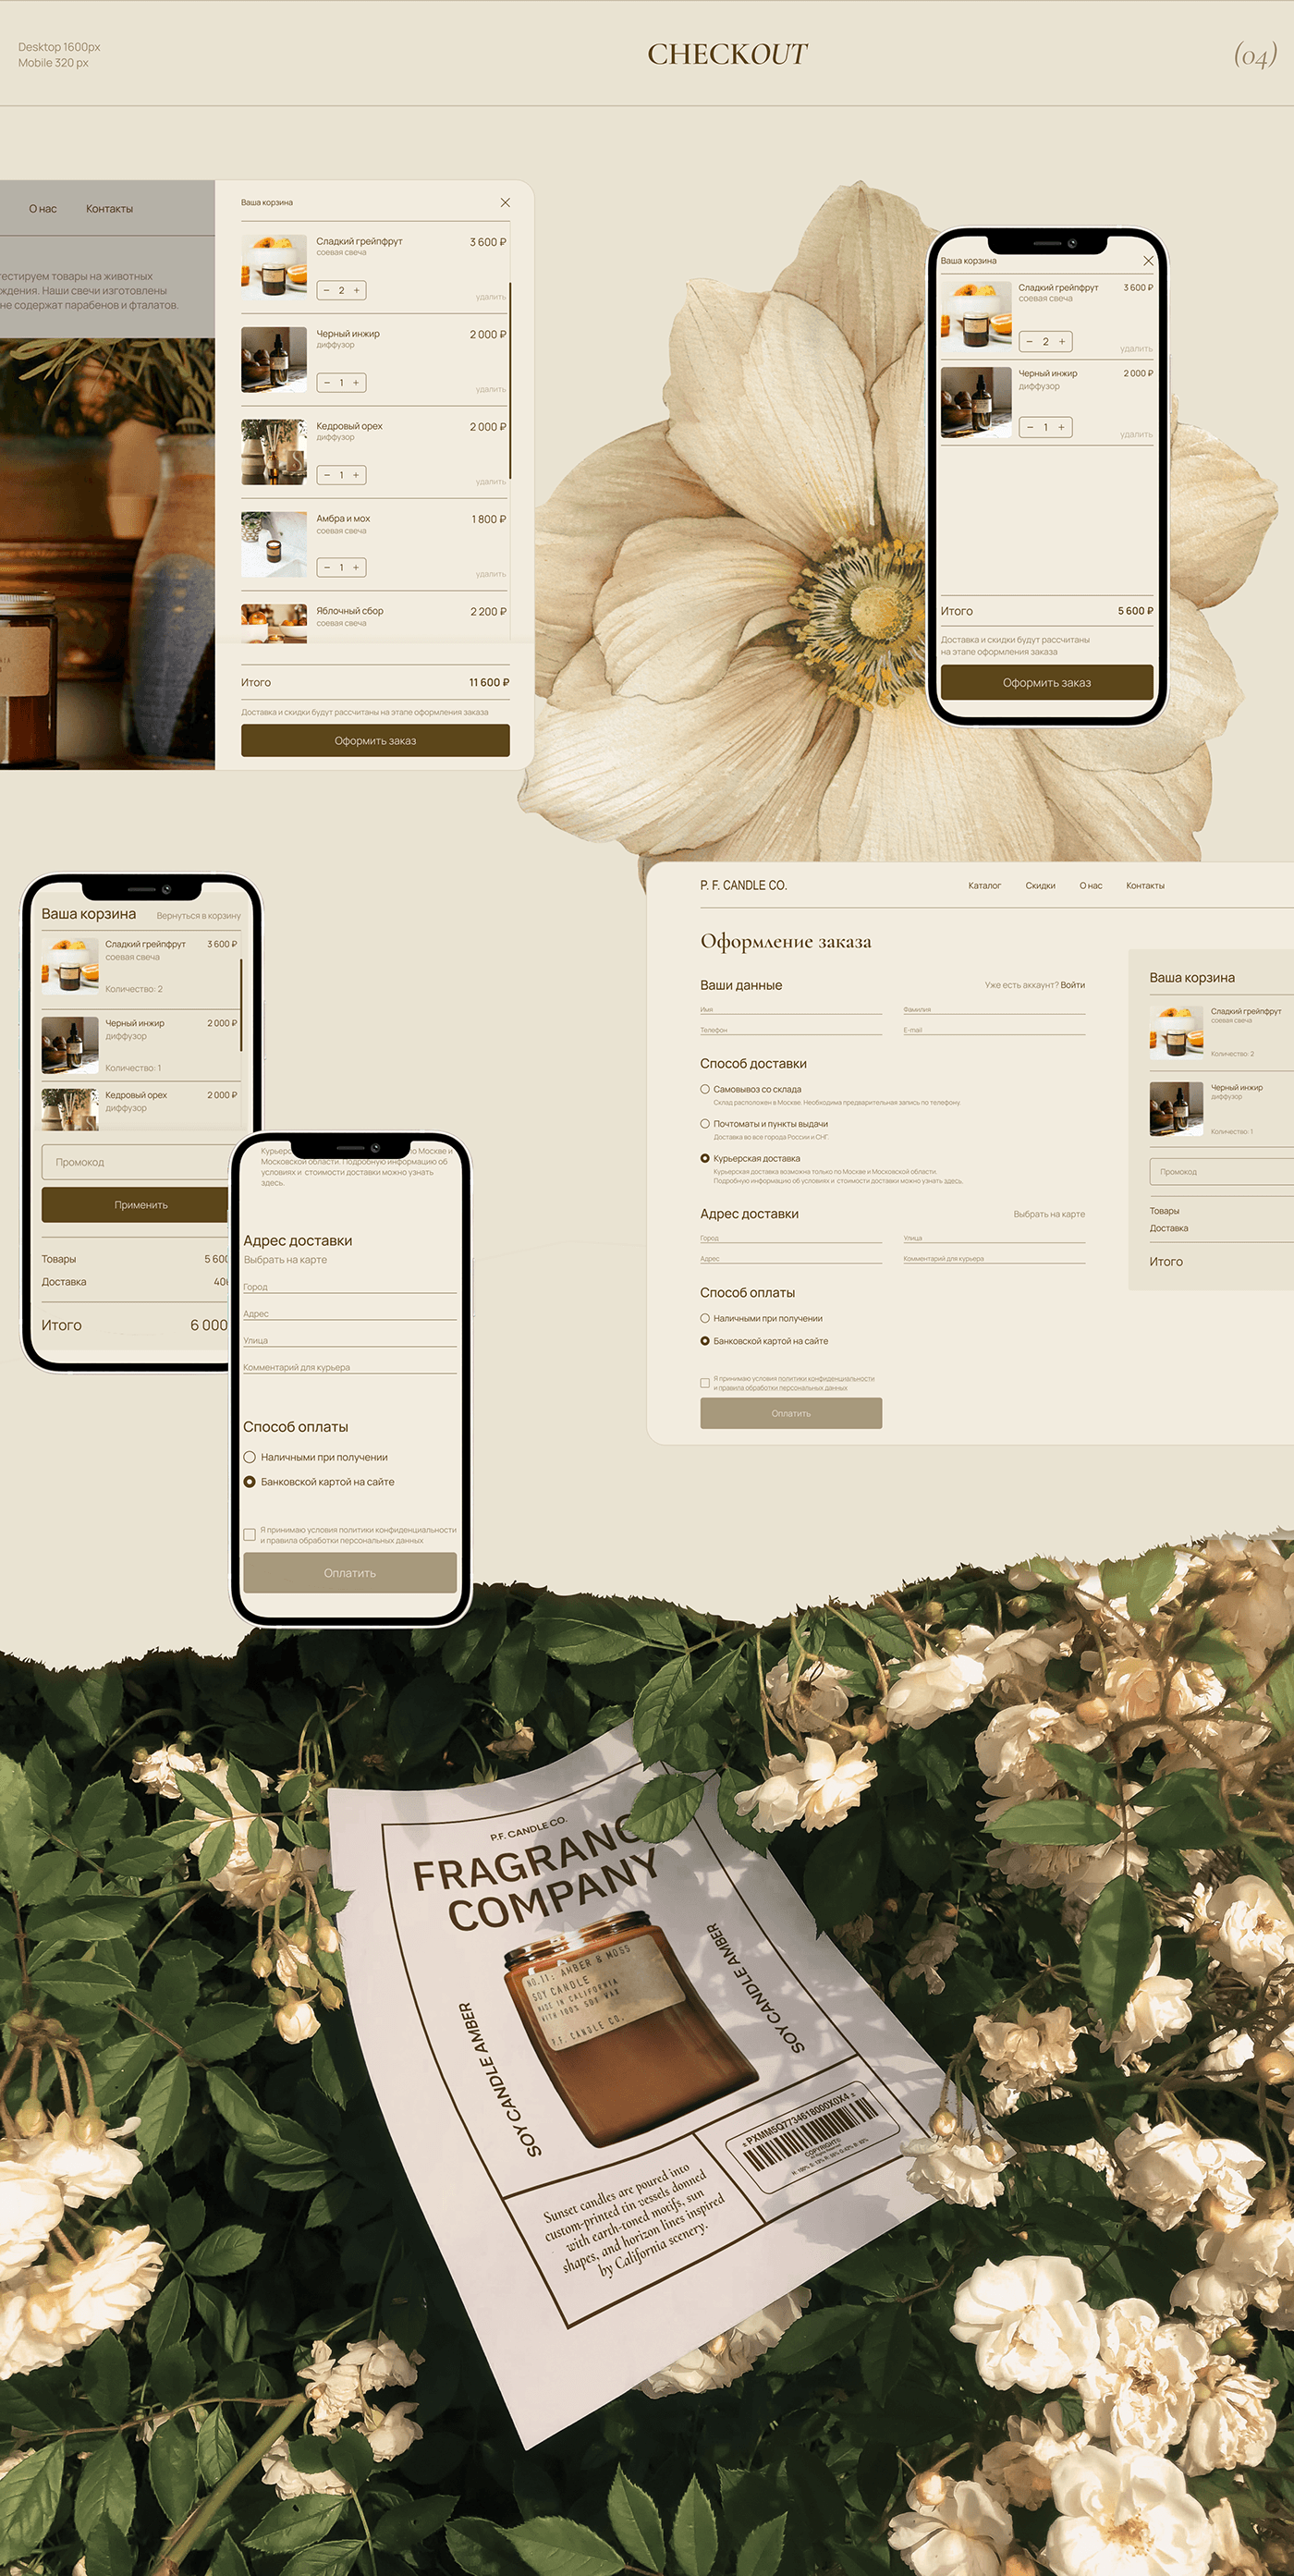 redesign Ecommerce Web Design  ux/ui Fragrance Interface Figma Website user interface candle